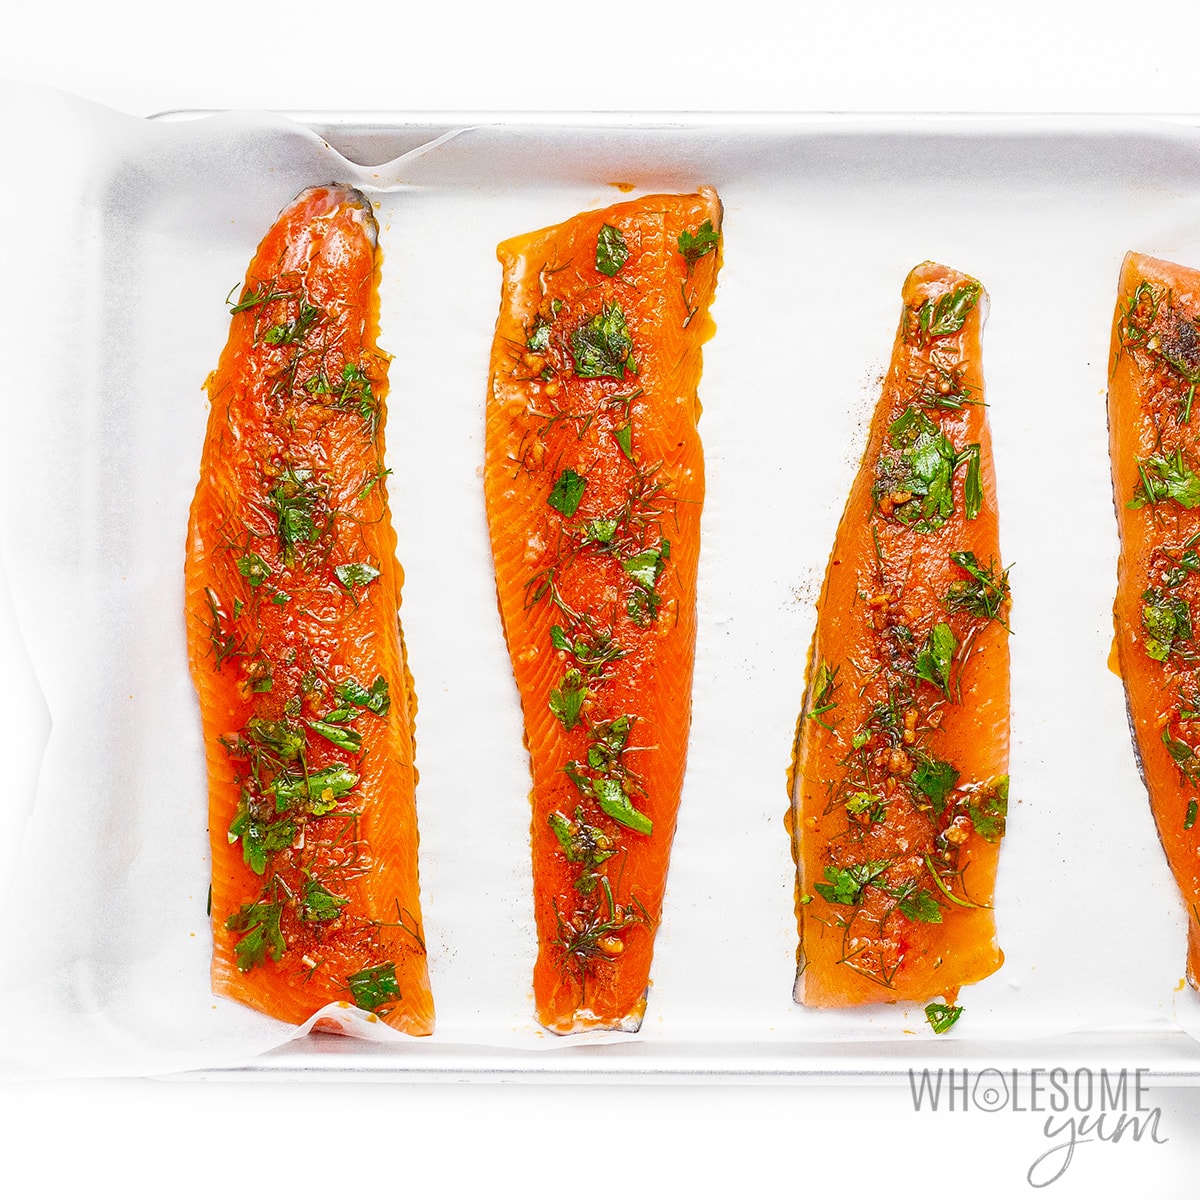 Raw rainbow trout fillets brushed with olive oil mixture.